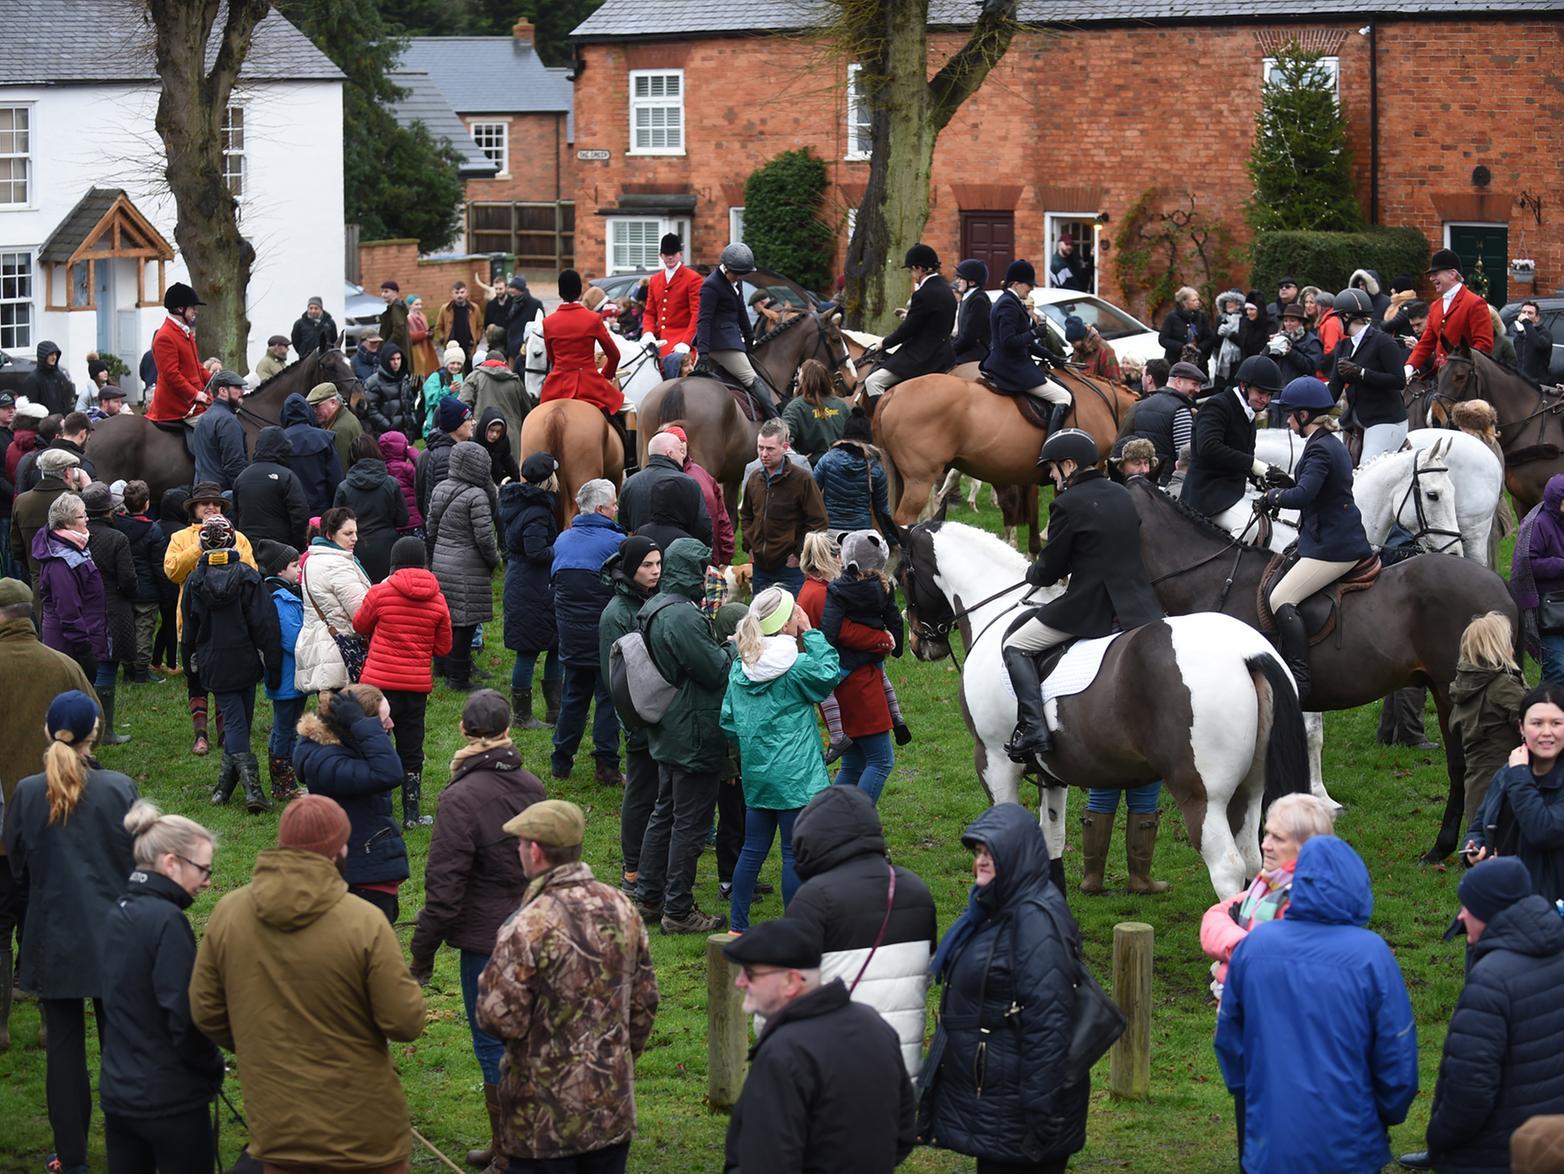 Busy scenes during the Fernie Hunt Boxing Day meet in Great Bowden.